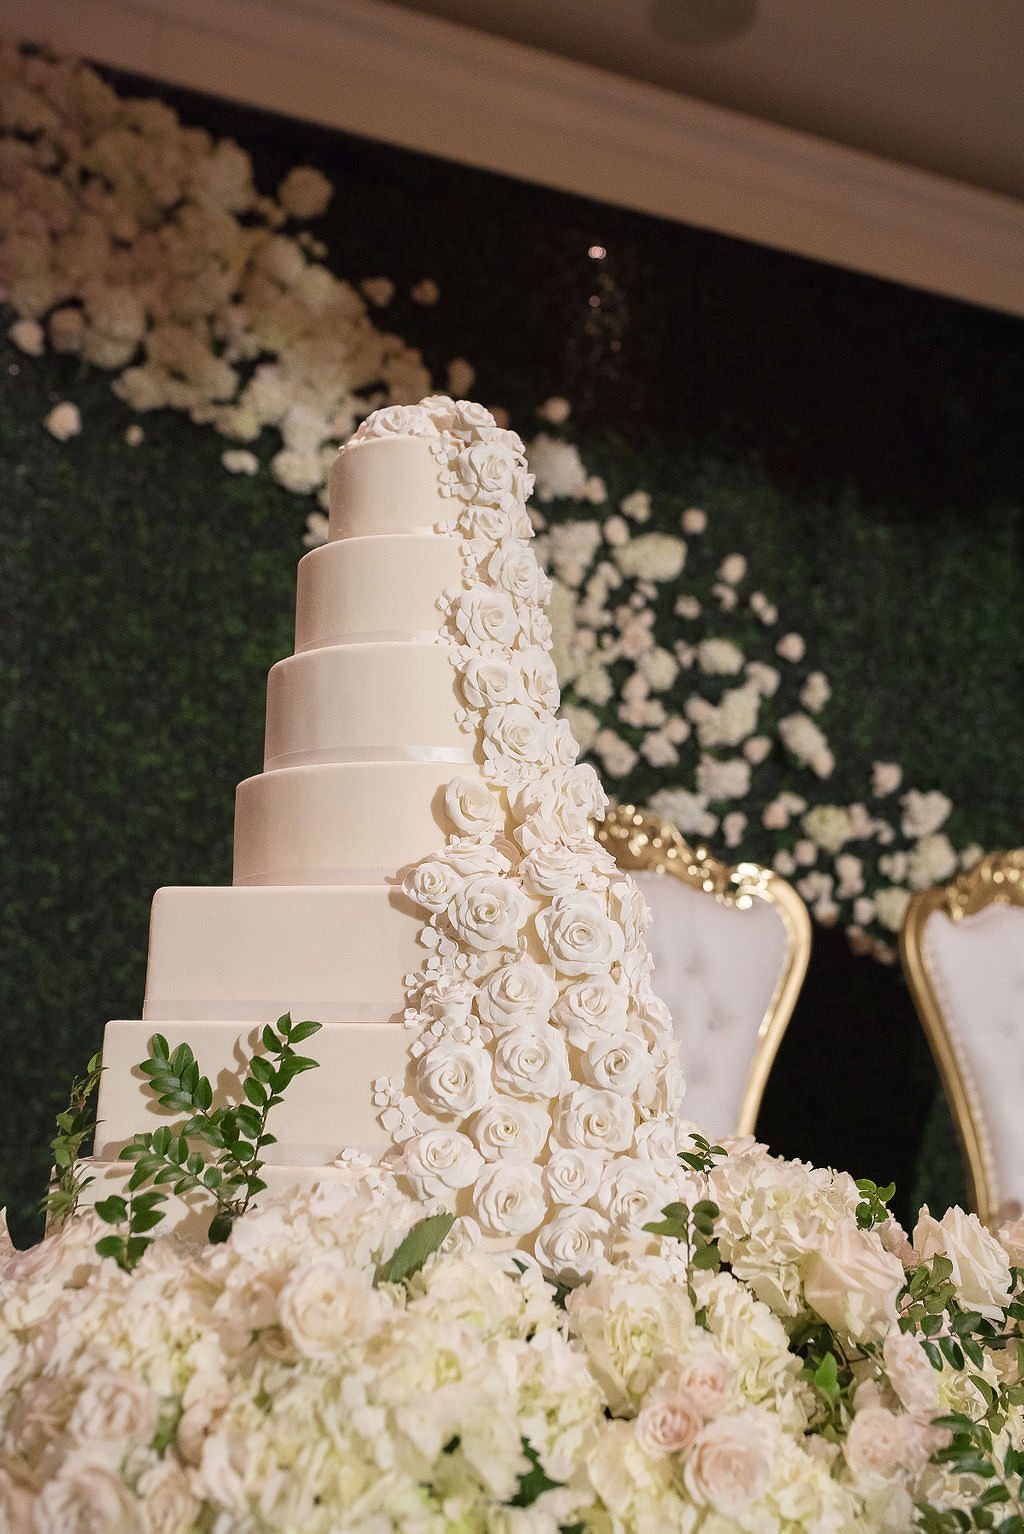 INSTAGRAM Classic, Elegant Seven Tier White Square and Round Wedding Cake with Cascading White Roses | Tampa Bay Wedding Photographer Kristen Marie Photography | Wedding Florist Gabro Event Services | Wedding Day of Coordinator Special Moments Event Planning